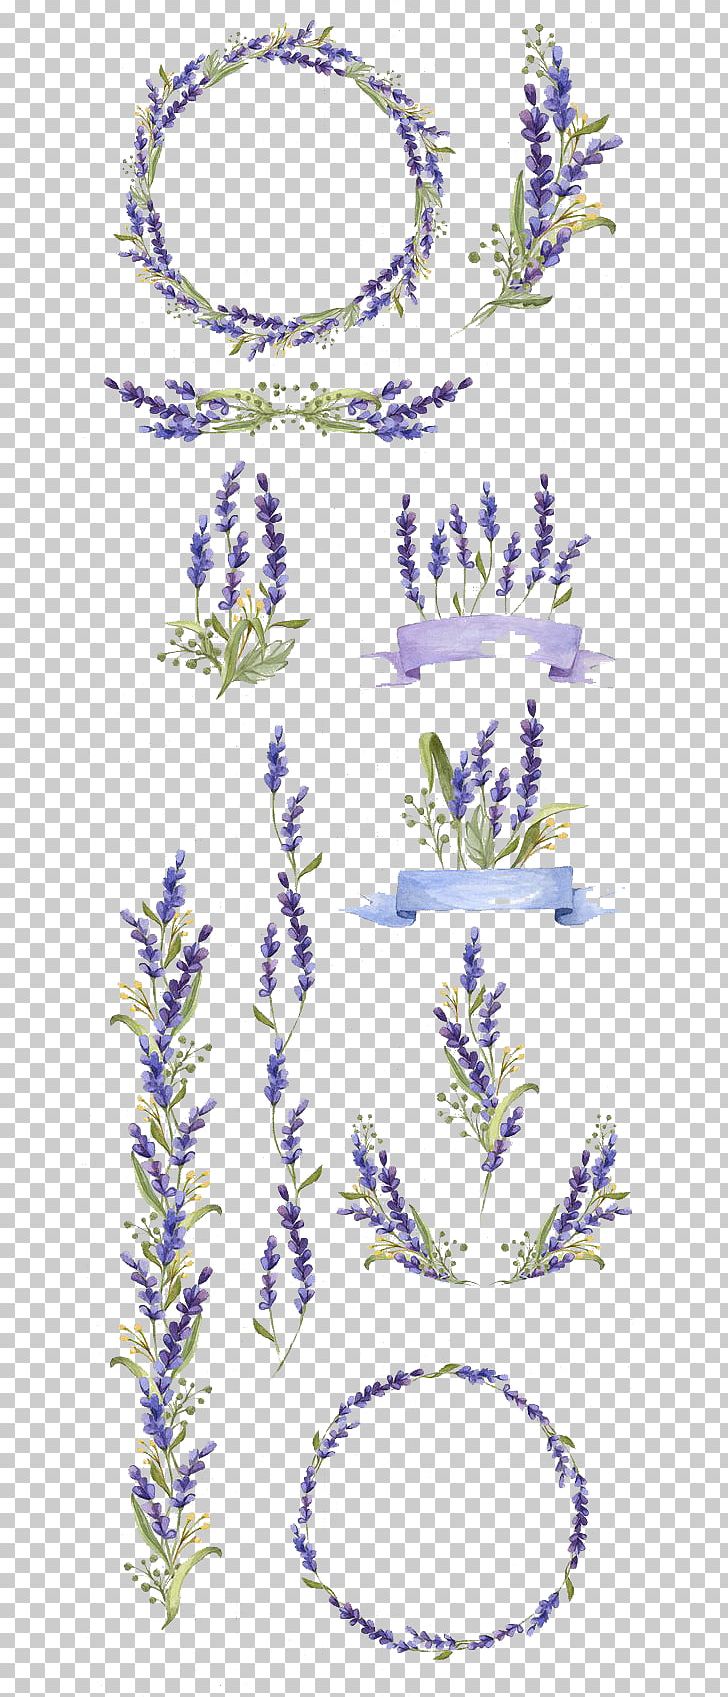 Watercolor Painting Flower Art Lavender PNG, Clipart, Branch, Cartoon, Creative Arts, Design, Drawing Free PNG Download